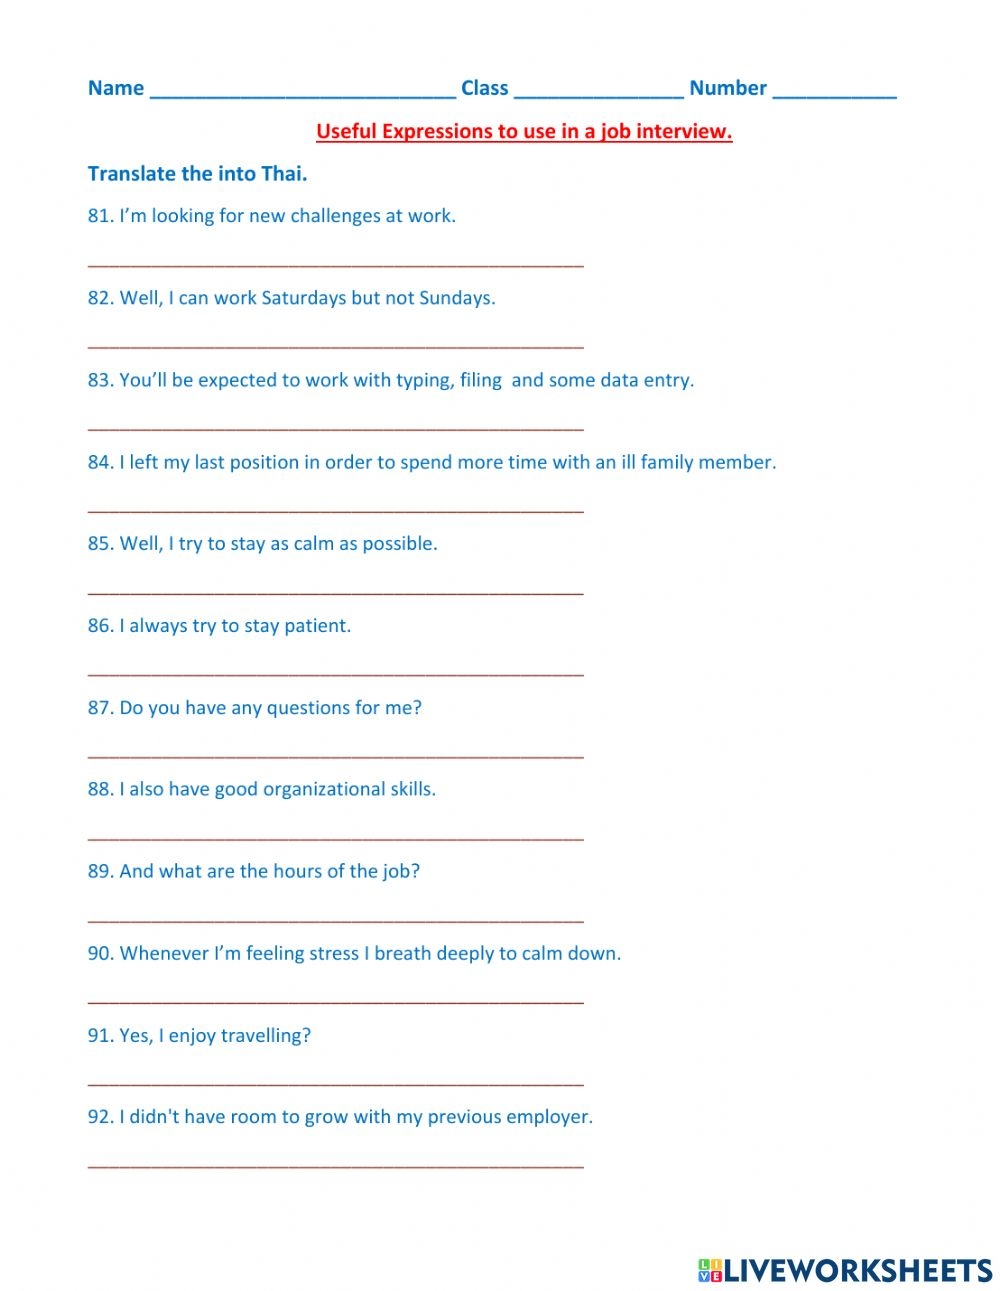 Job Interview Worksheet For Students